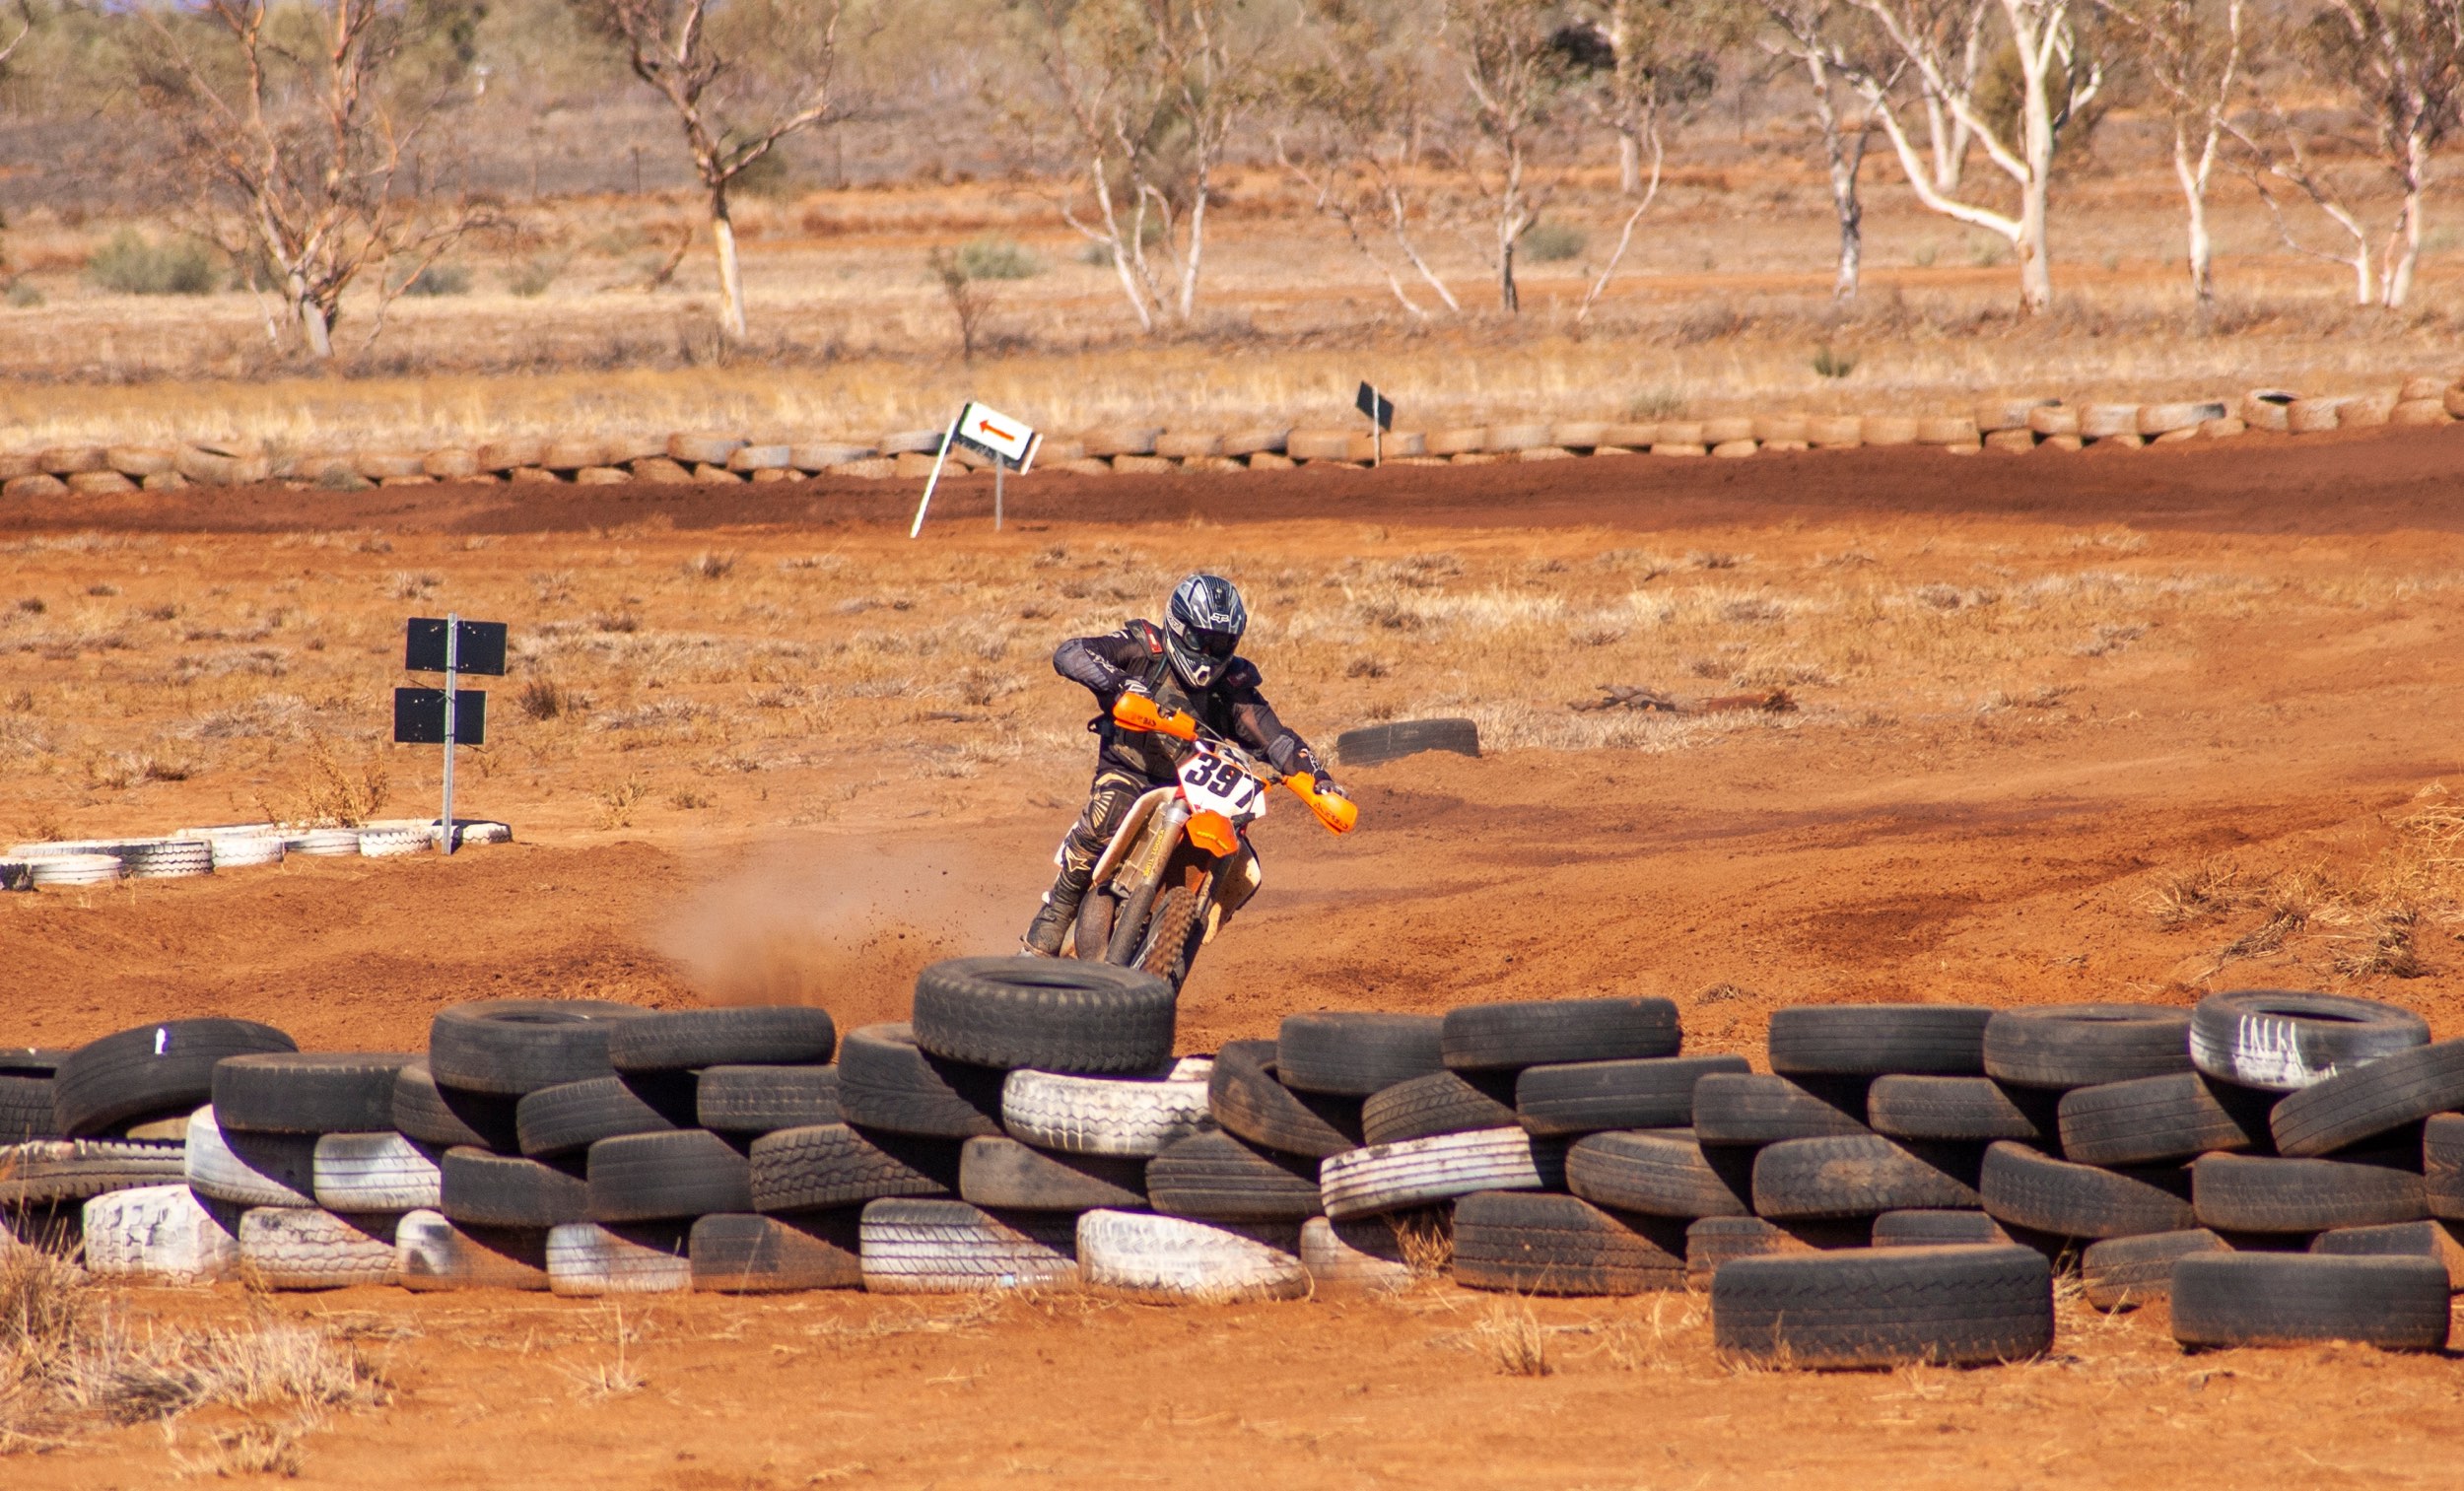 Alice Springs, Northern Territory, Australia - 2005: Motorbike competitor in the annual Finke Desert Race, a two-day off-road event from Alice Springs to Finke in outback Northern Territory.